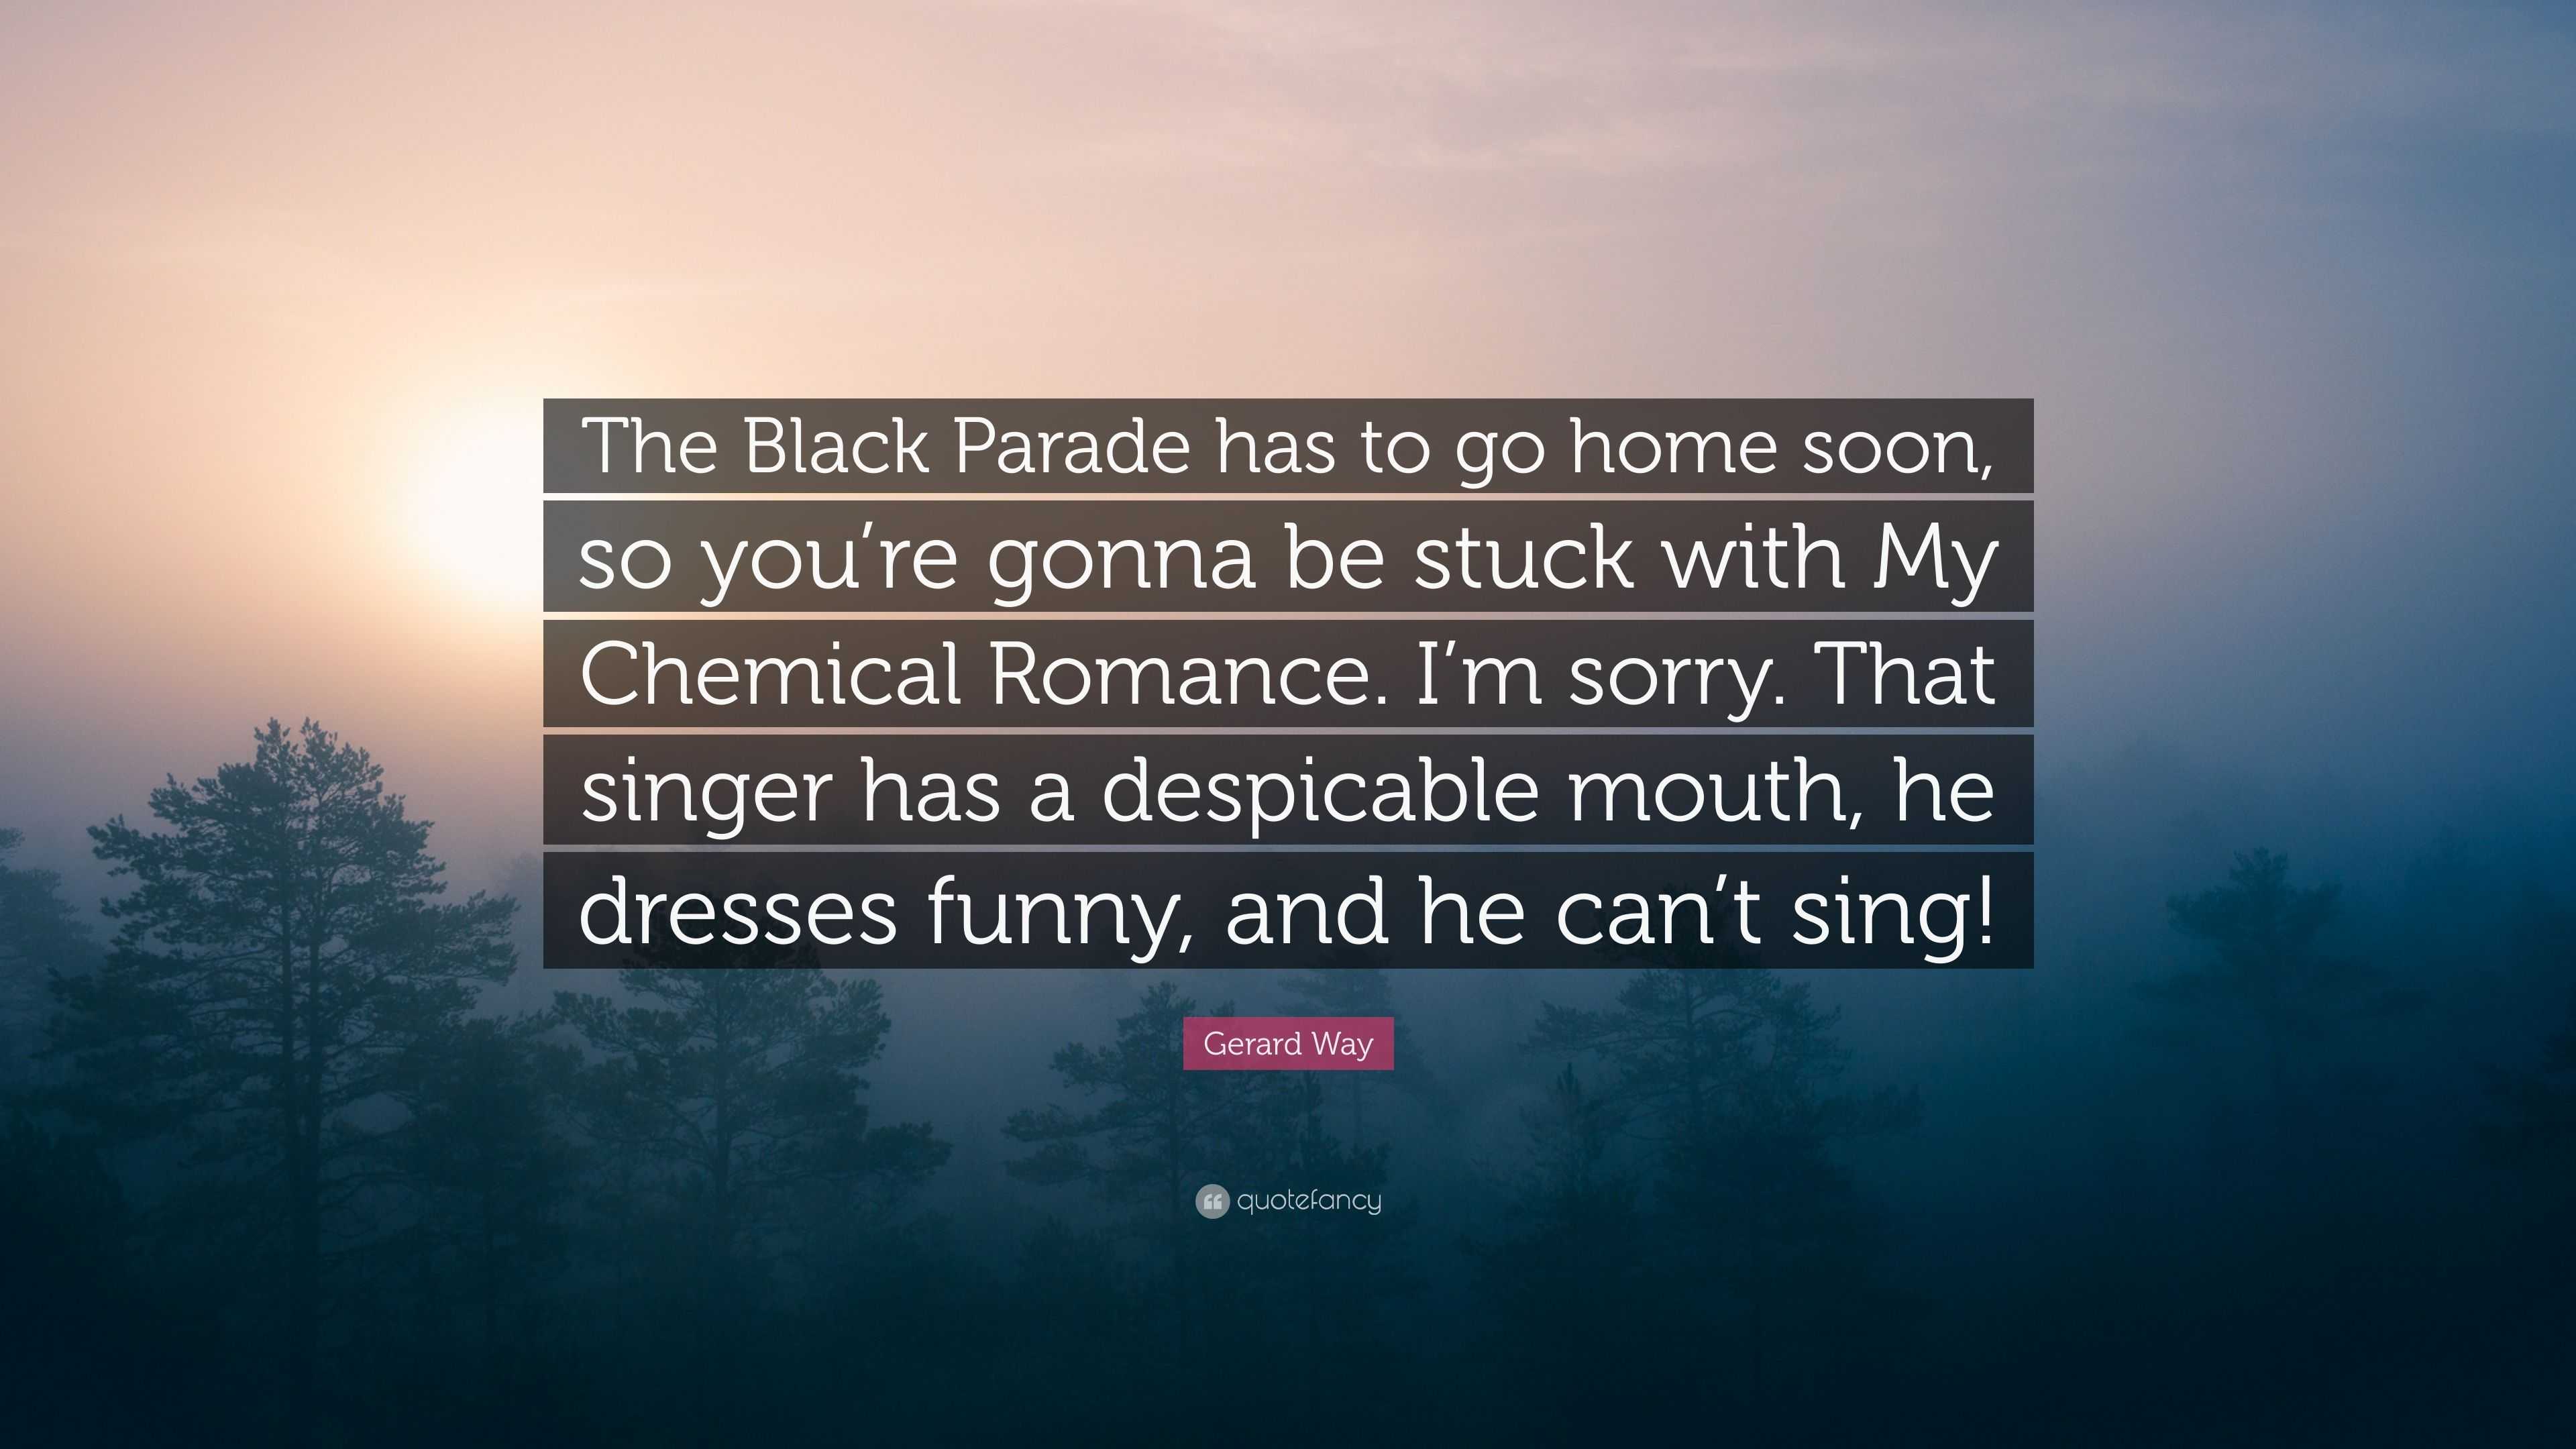 Gerard Way Quote The Black Parade Has To Go Home Soon So You Re Gonna Be Stuck With My Chemical Romance I M Sorry That Singer Has A De